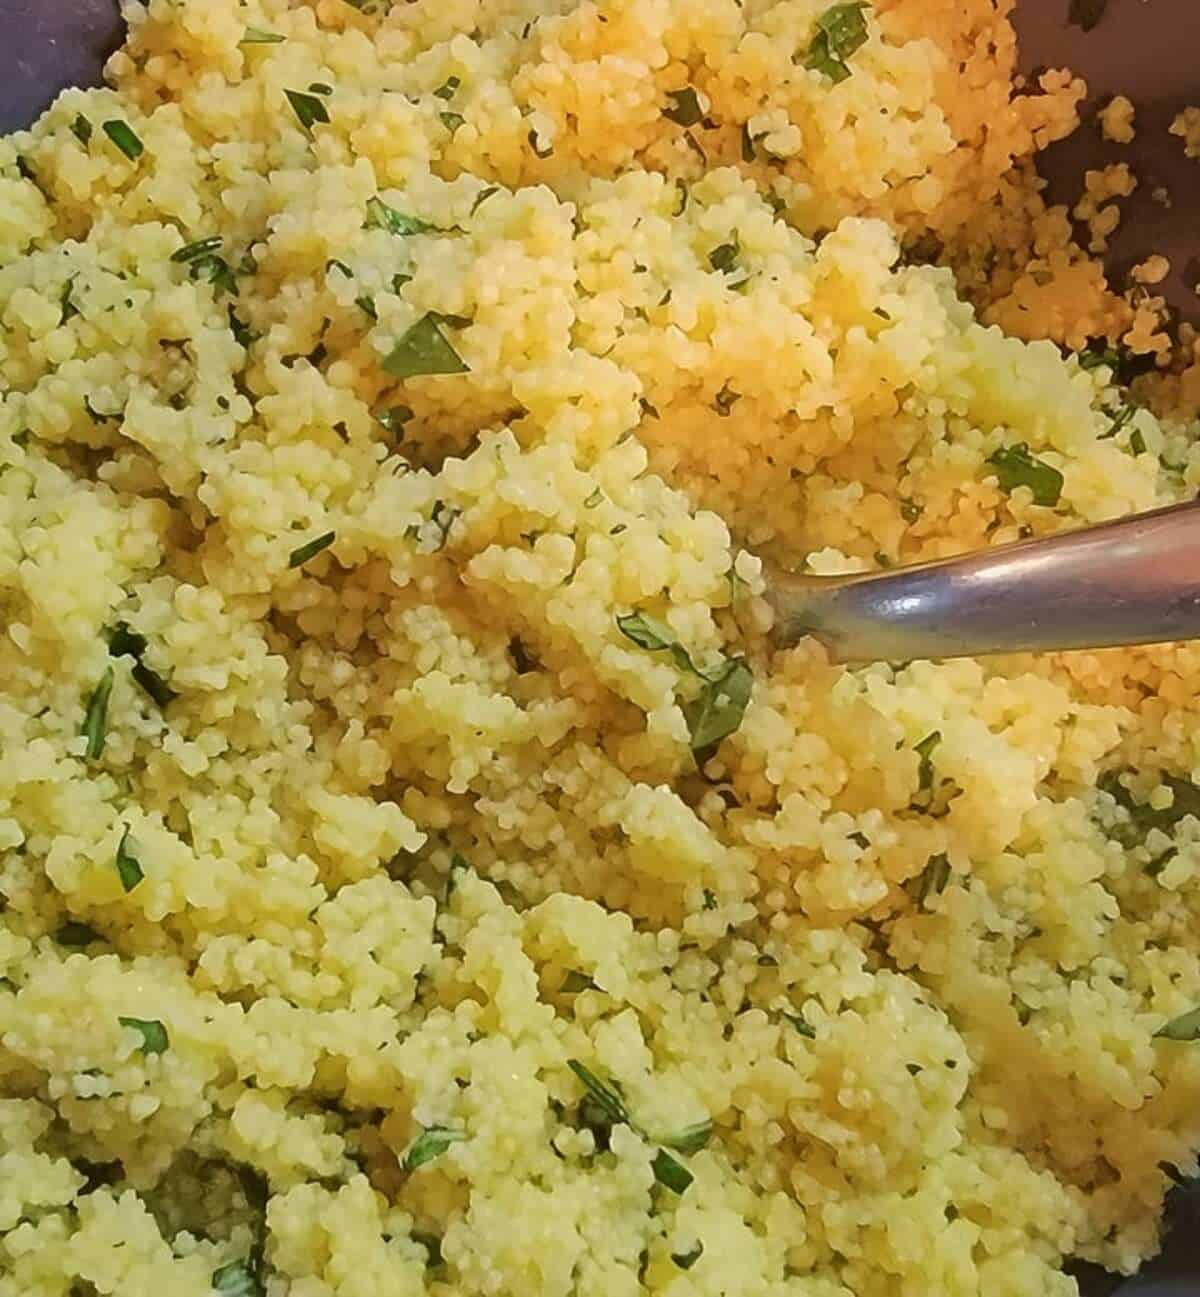 finished herb couscous being fluffed with a fork